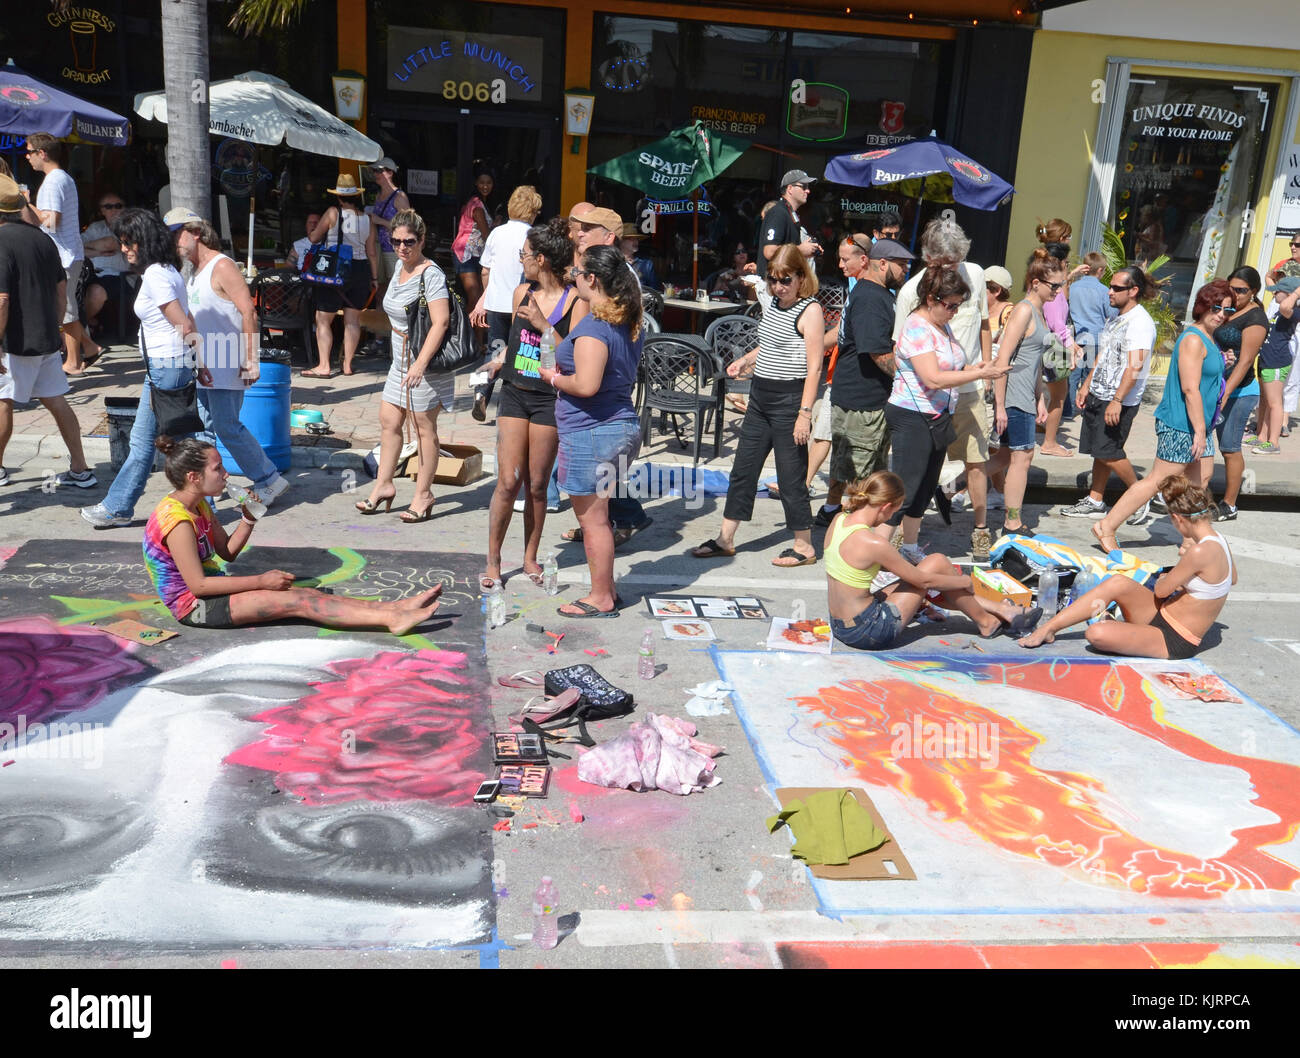 Lake Worth, USA - February 24, 2013: Artists crate chalk drawing during the annual Street Art festival in lake Worth FL on February 24, 2013 Stock Photo